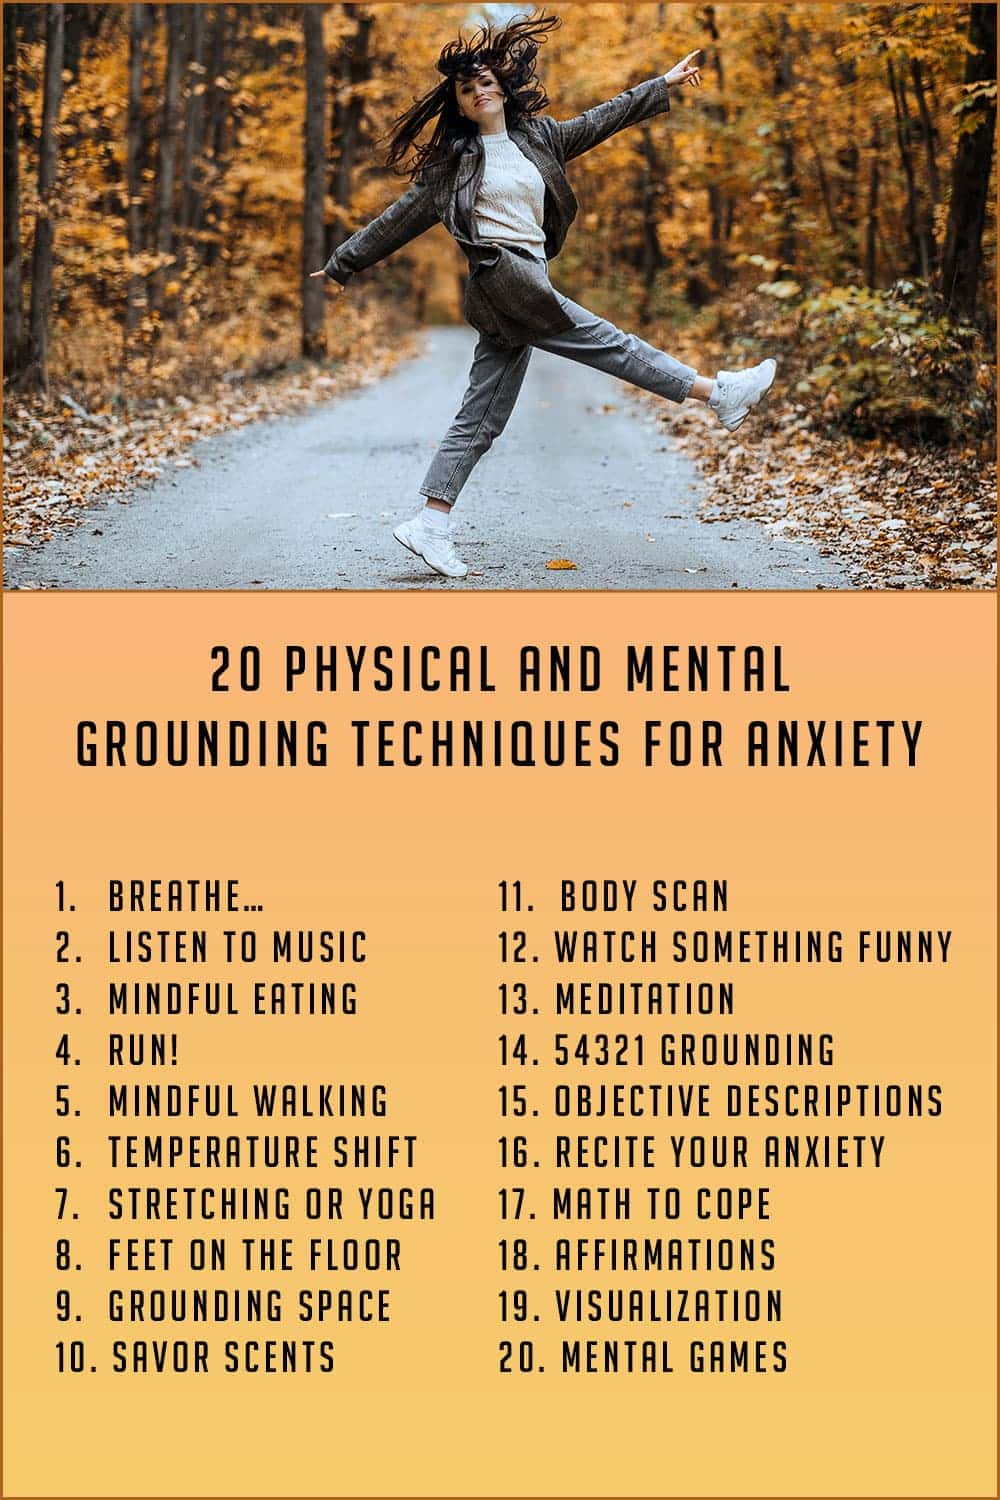 grounding techniques for anxiety